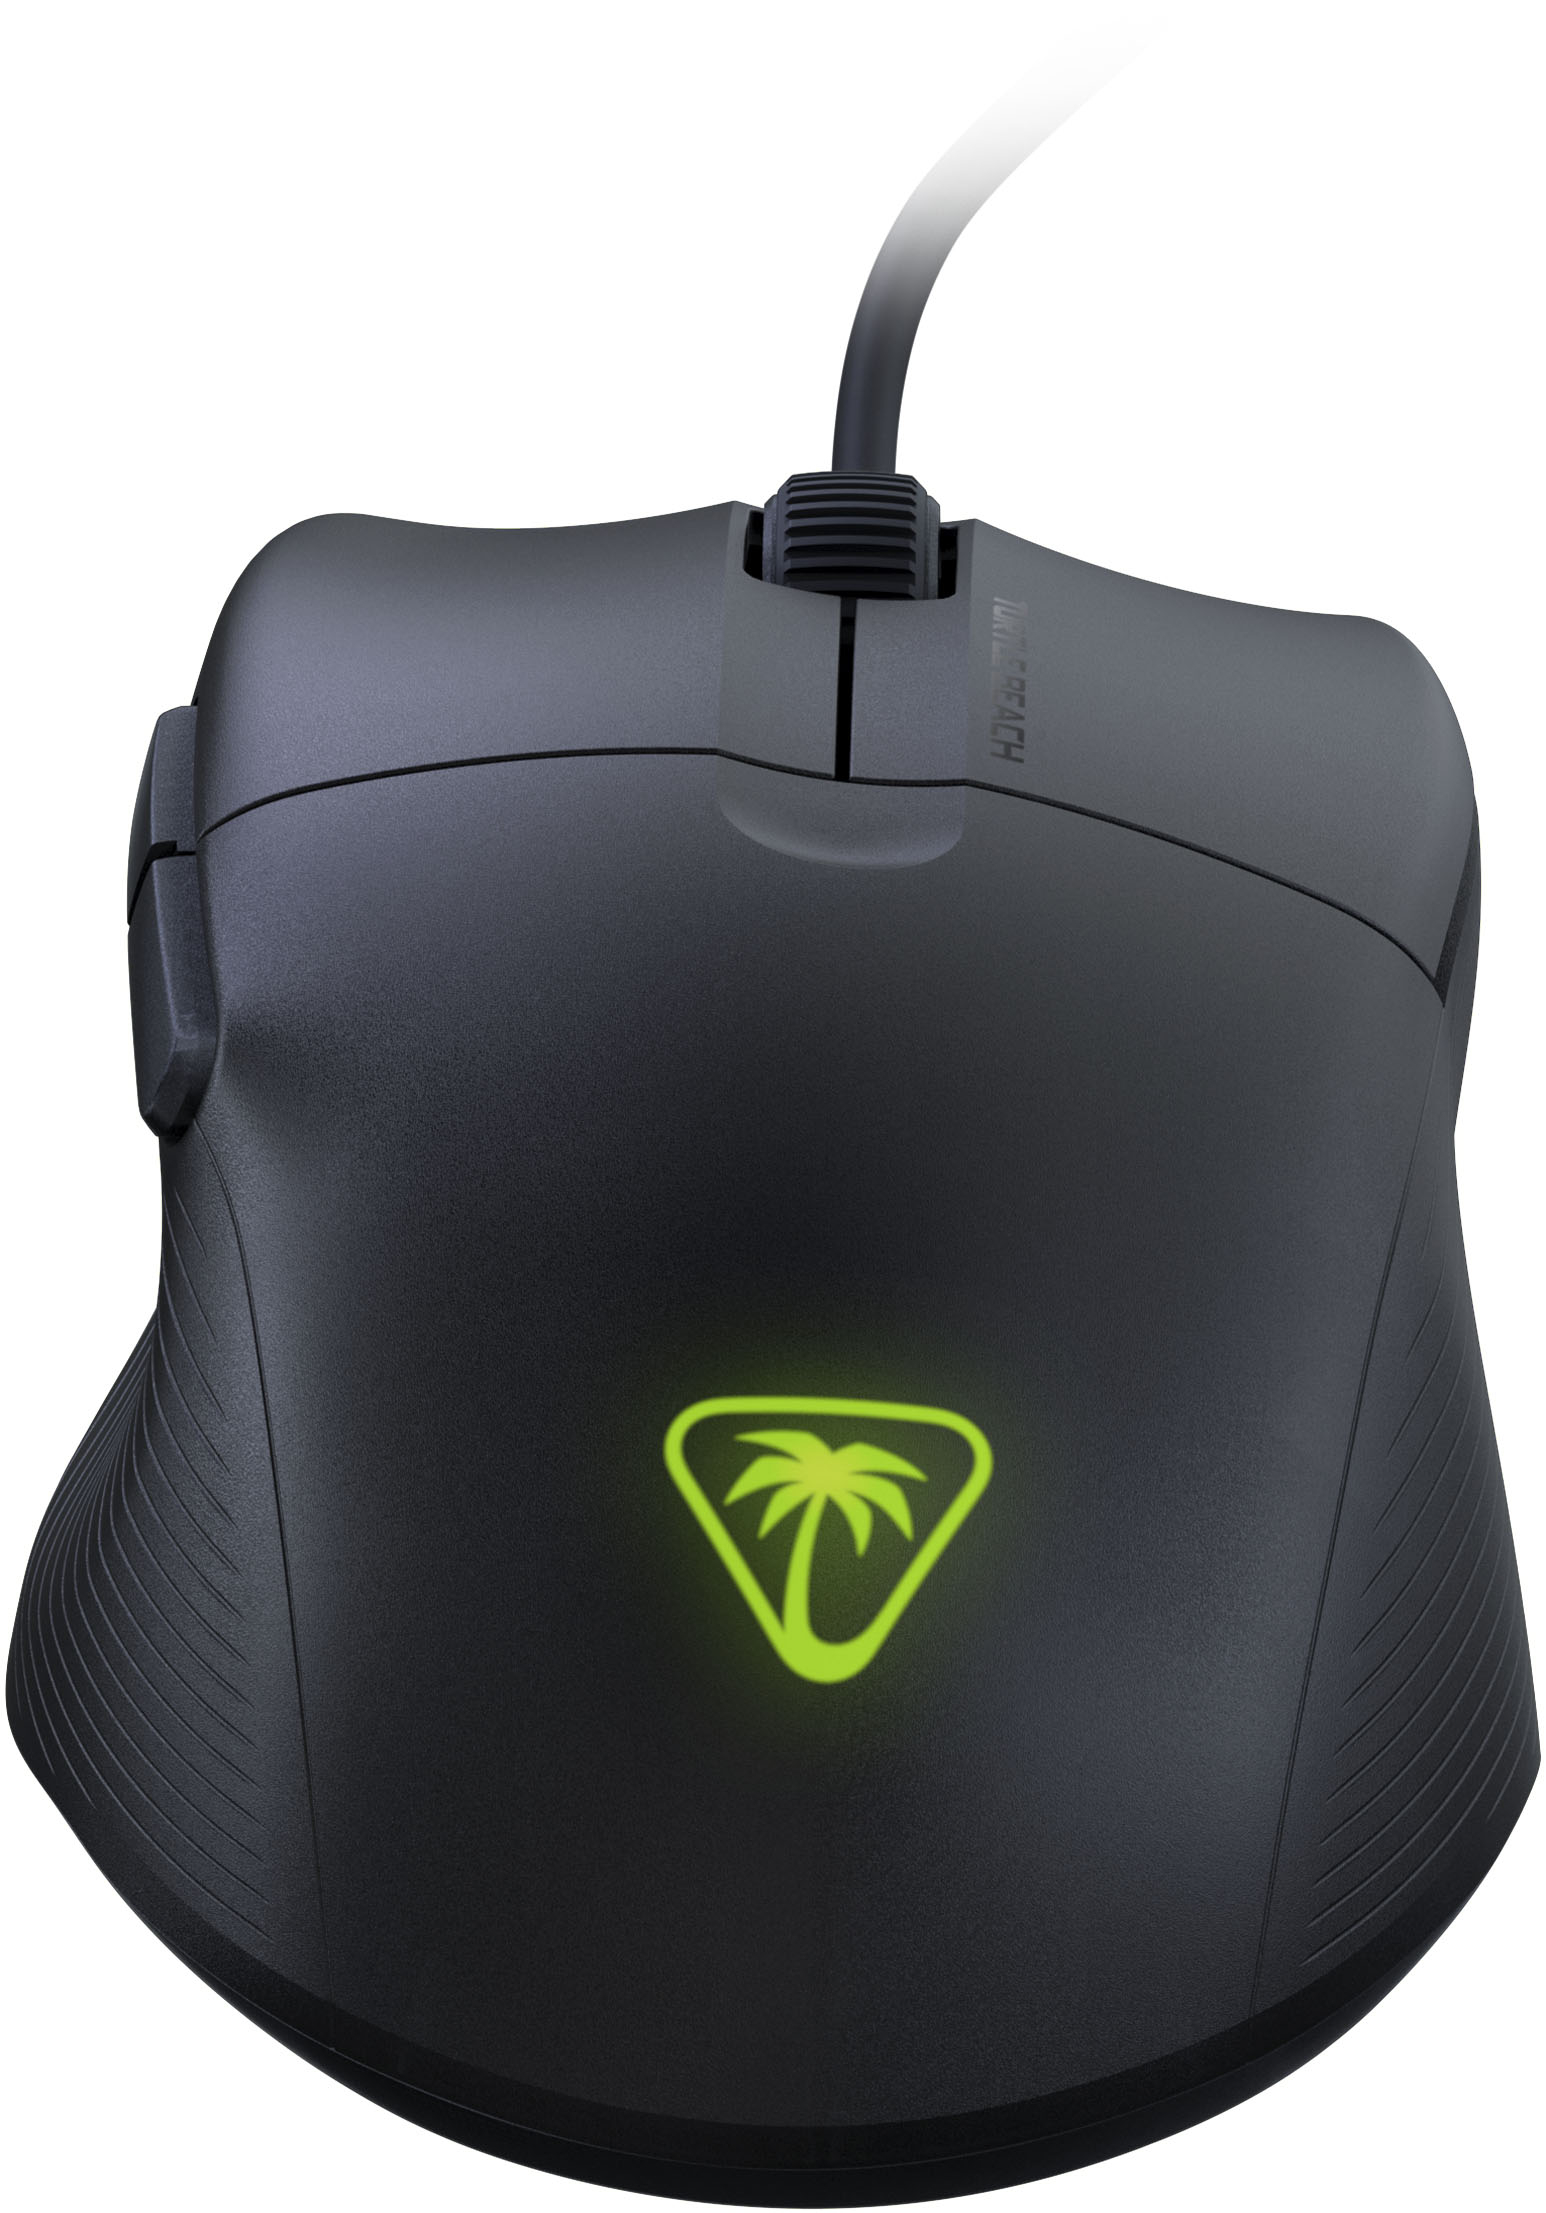 Back View: Turtle Beach - Pure SEL Ultra-Light Wired Ergonomic RGB Gaming Mouse with 8K DPI Optical Sensor & Mechanical Switches - Black